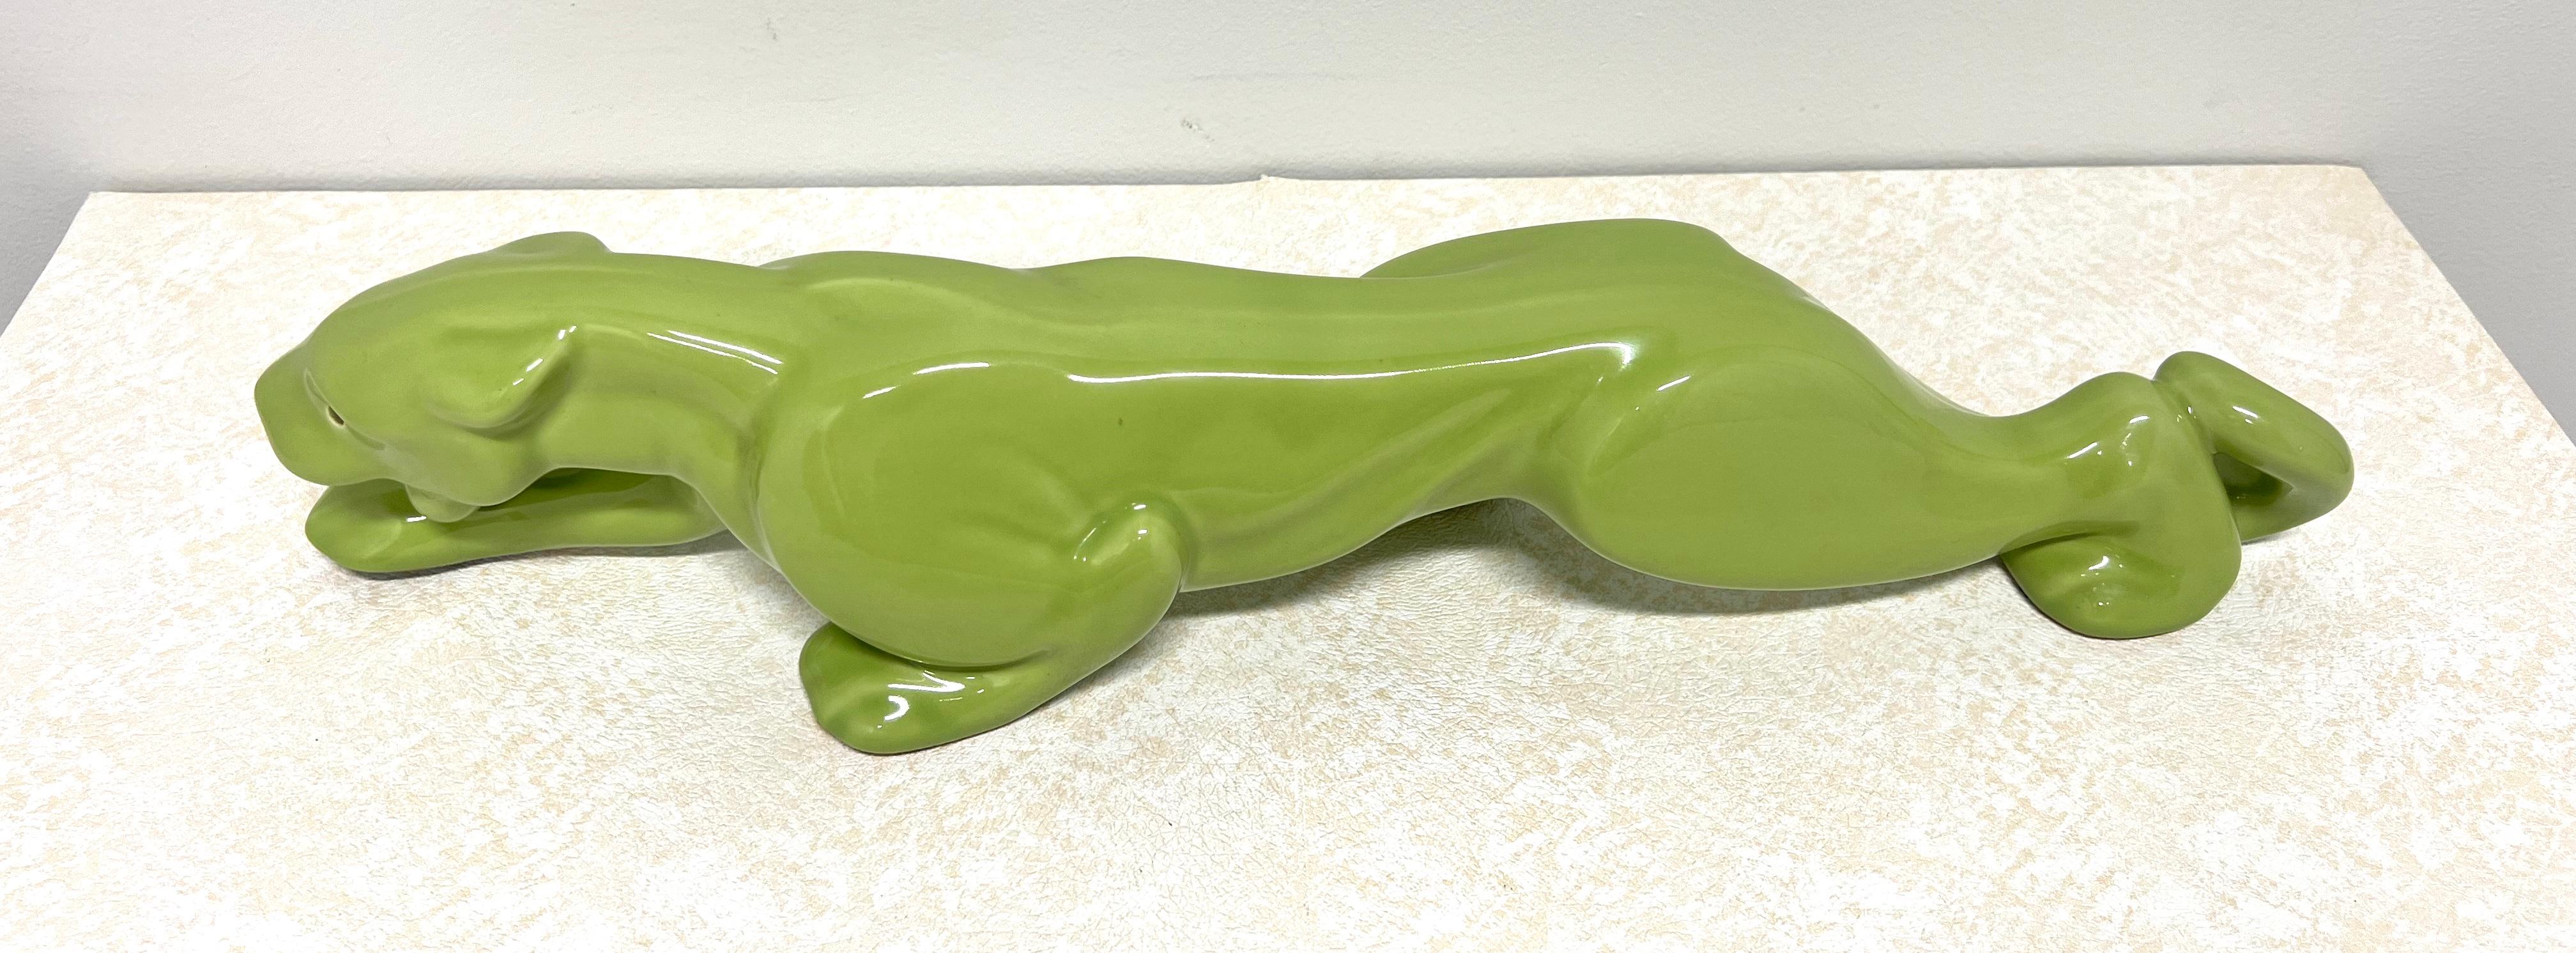 American Mid 20th Century Chartreuse Green Ceramic Panther TV Lamp For Sale